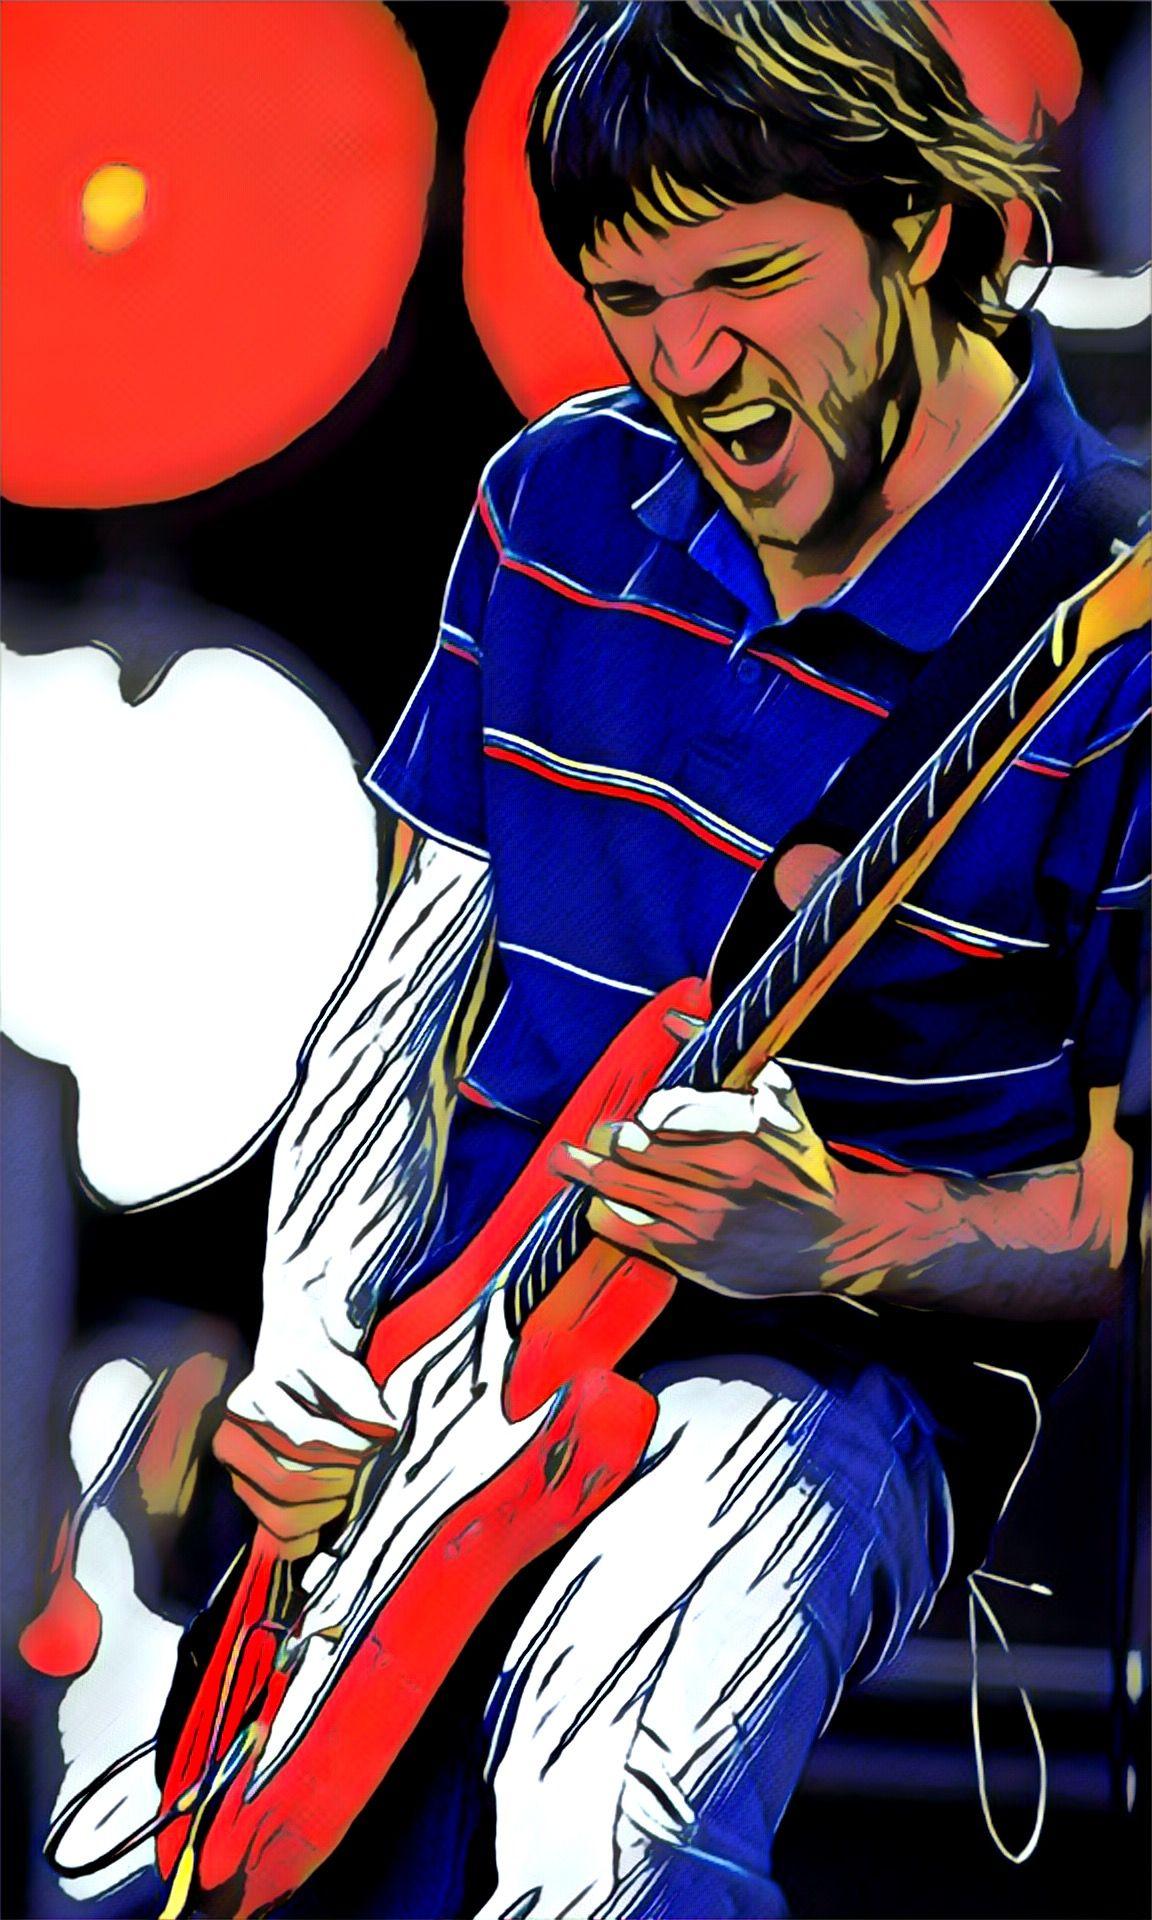 Awesome John Frusciante wallpapers I made with prisma.